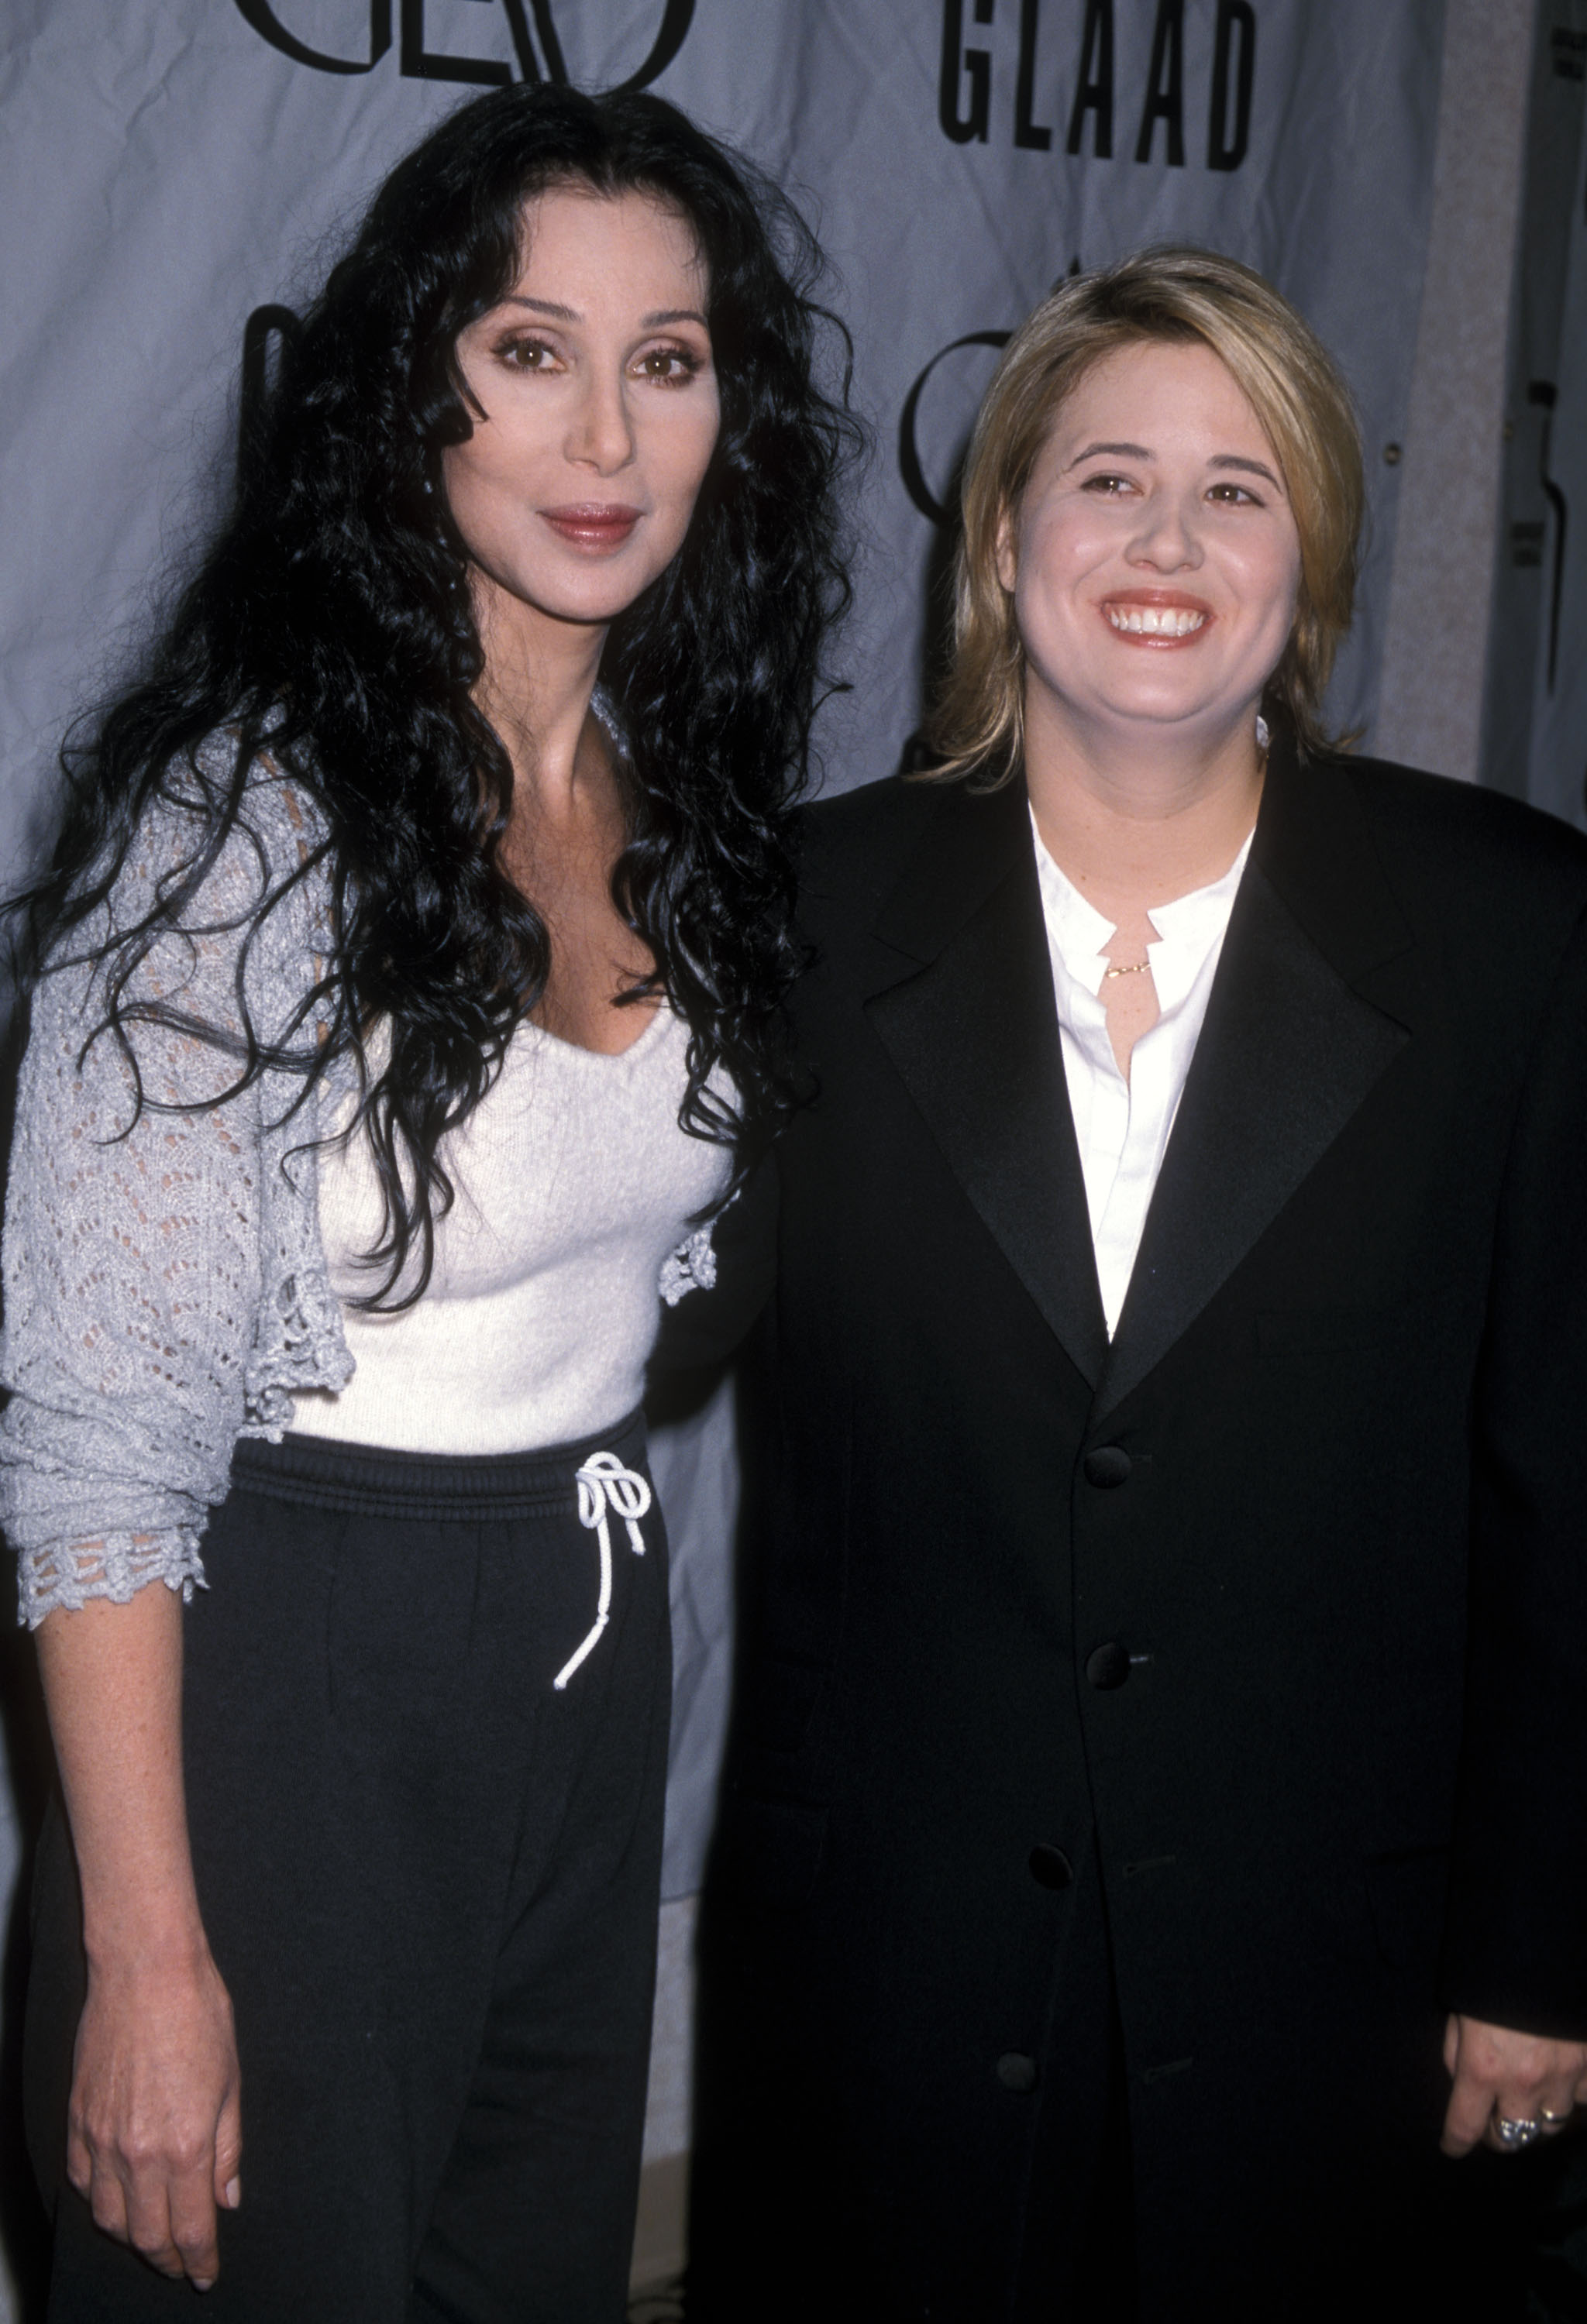 Cher and Chastity Bono attend the Ninth Annual GLAAD Media Awards on April 19, 1998 in Los Angeles, California | Source: Getty Images